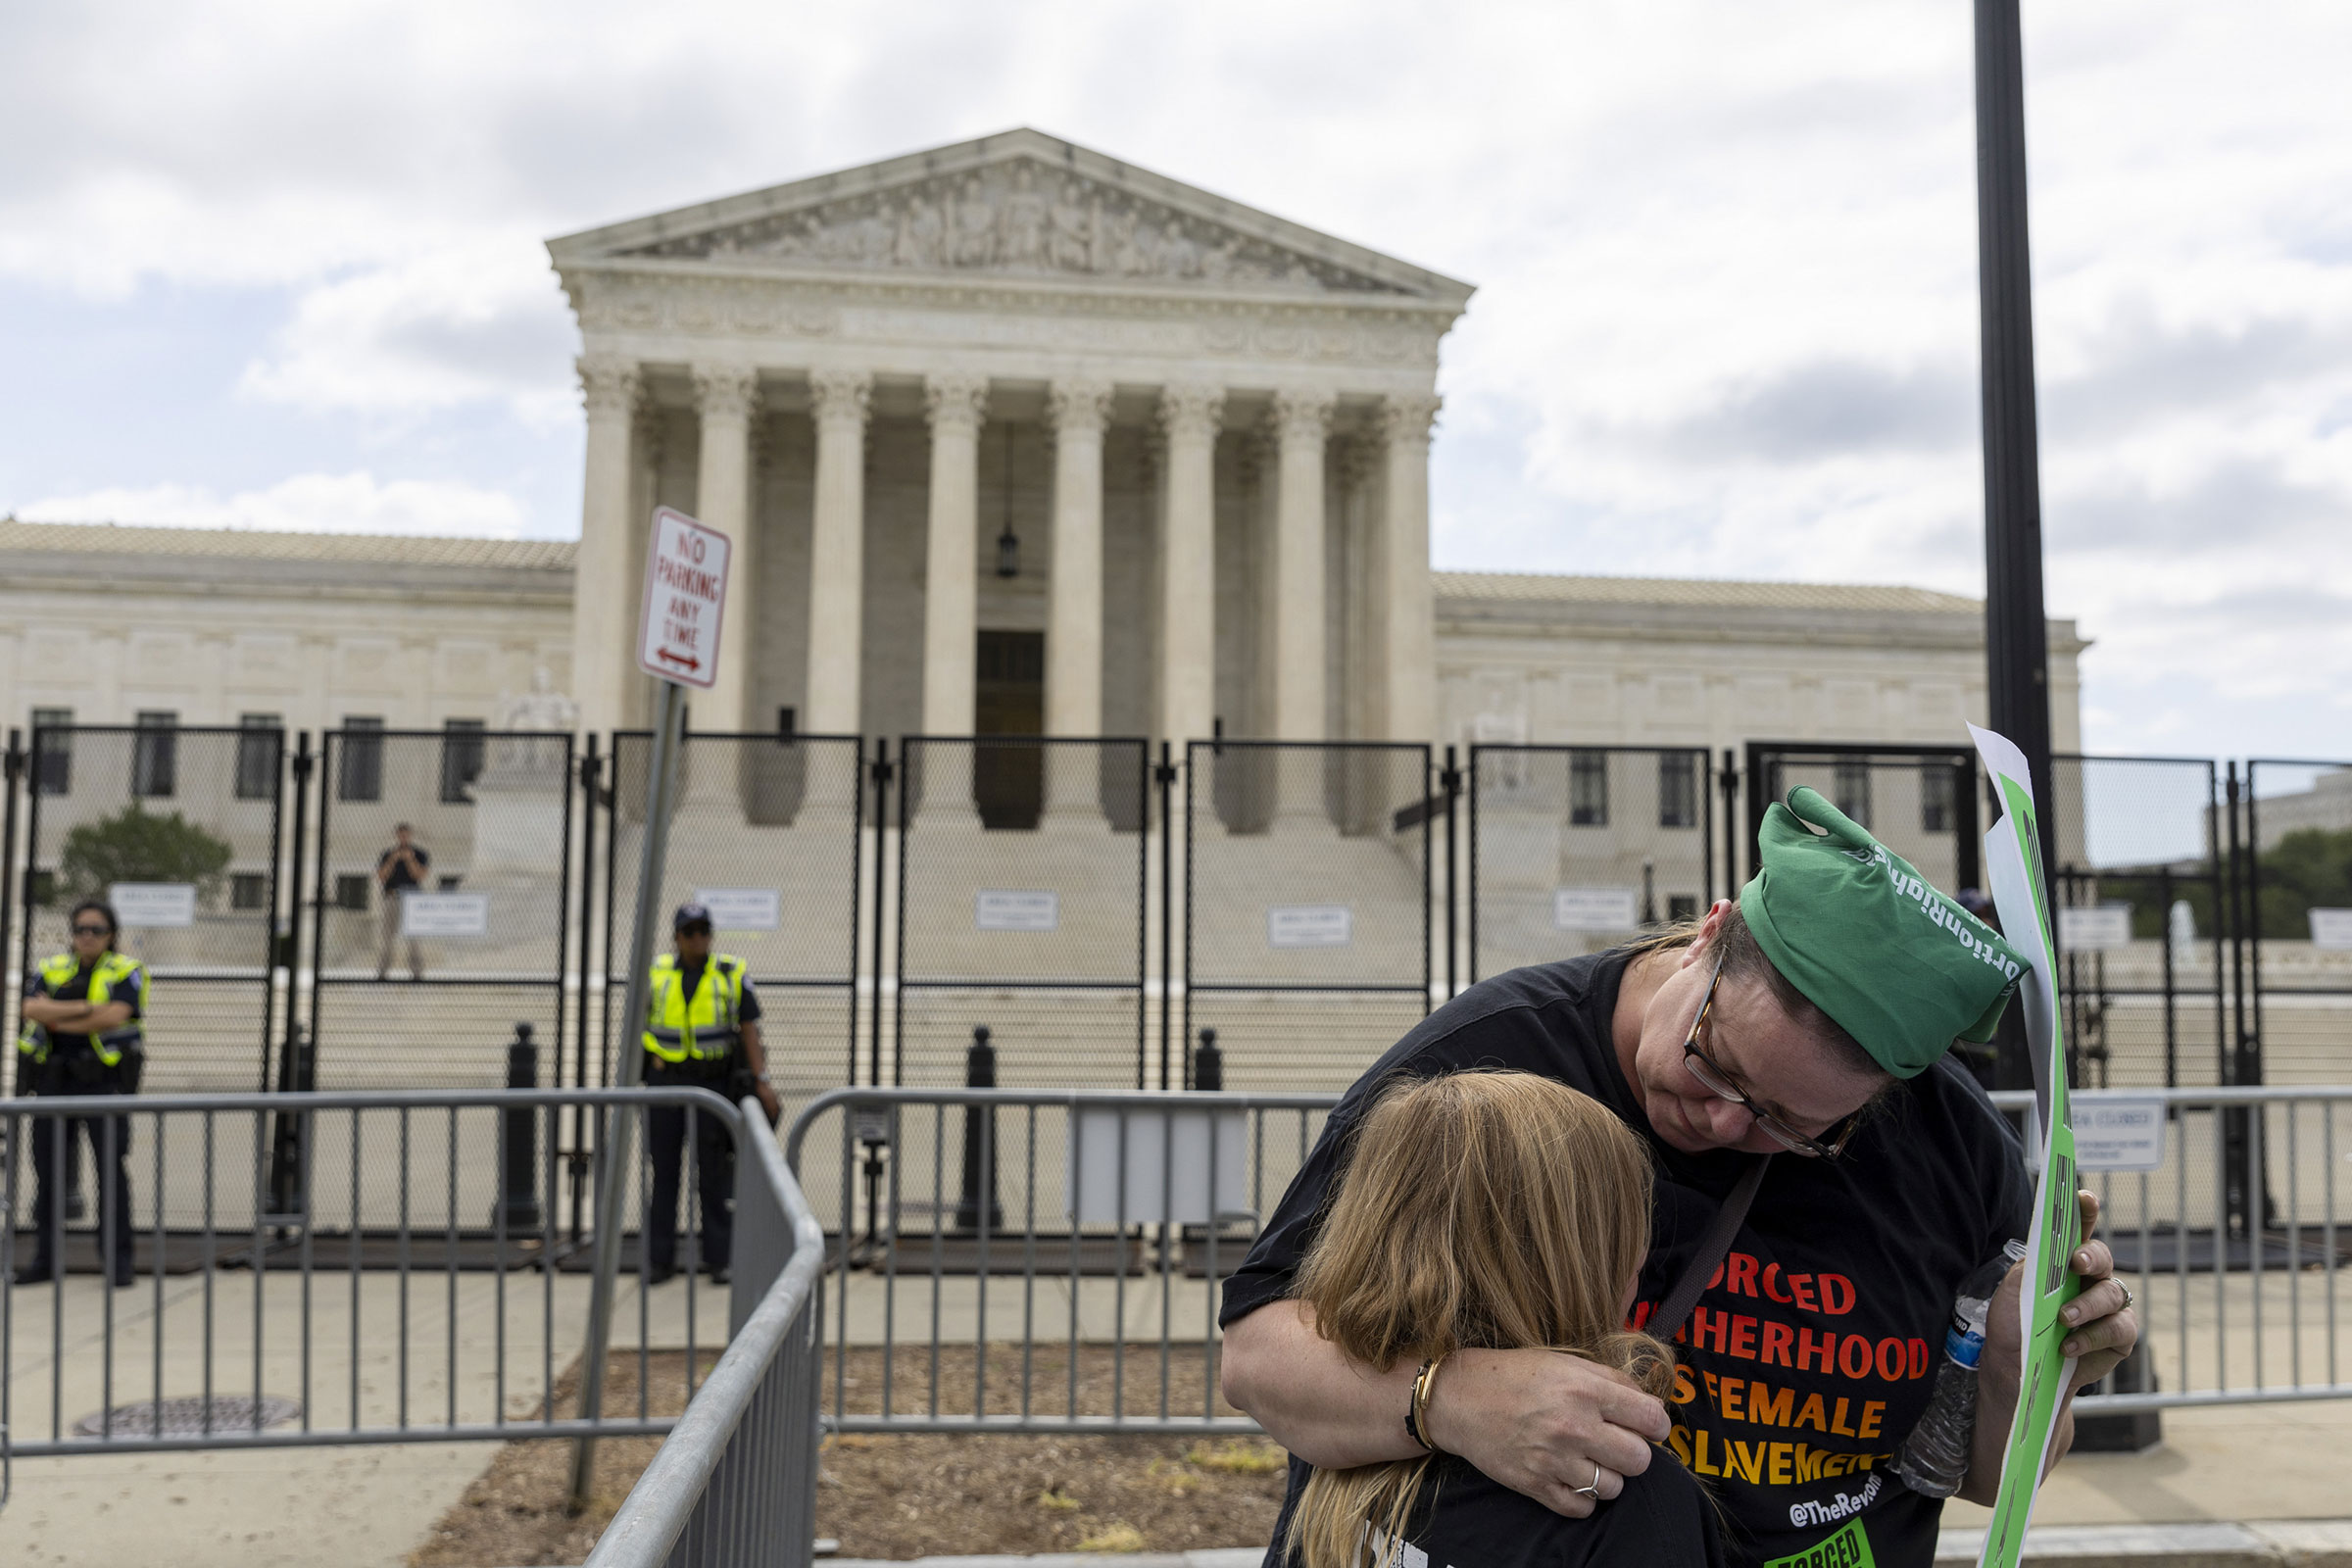 A women consoles her daughter as protesters gather in front of the U.S. Supreme Court in Washington, D.C., on Friday, June 24, 2022. (Tasos Katopodis—UPI/Shutterstock)